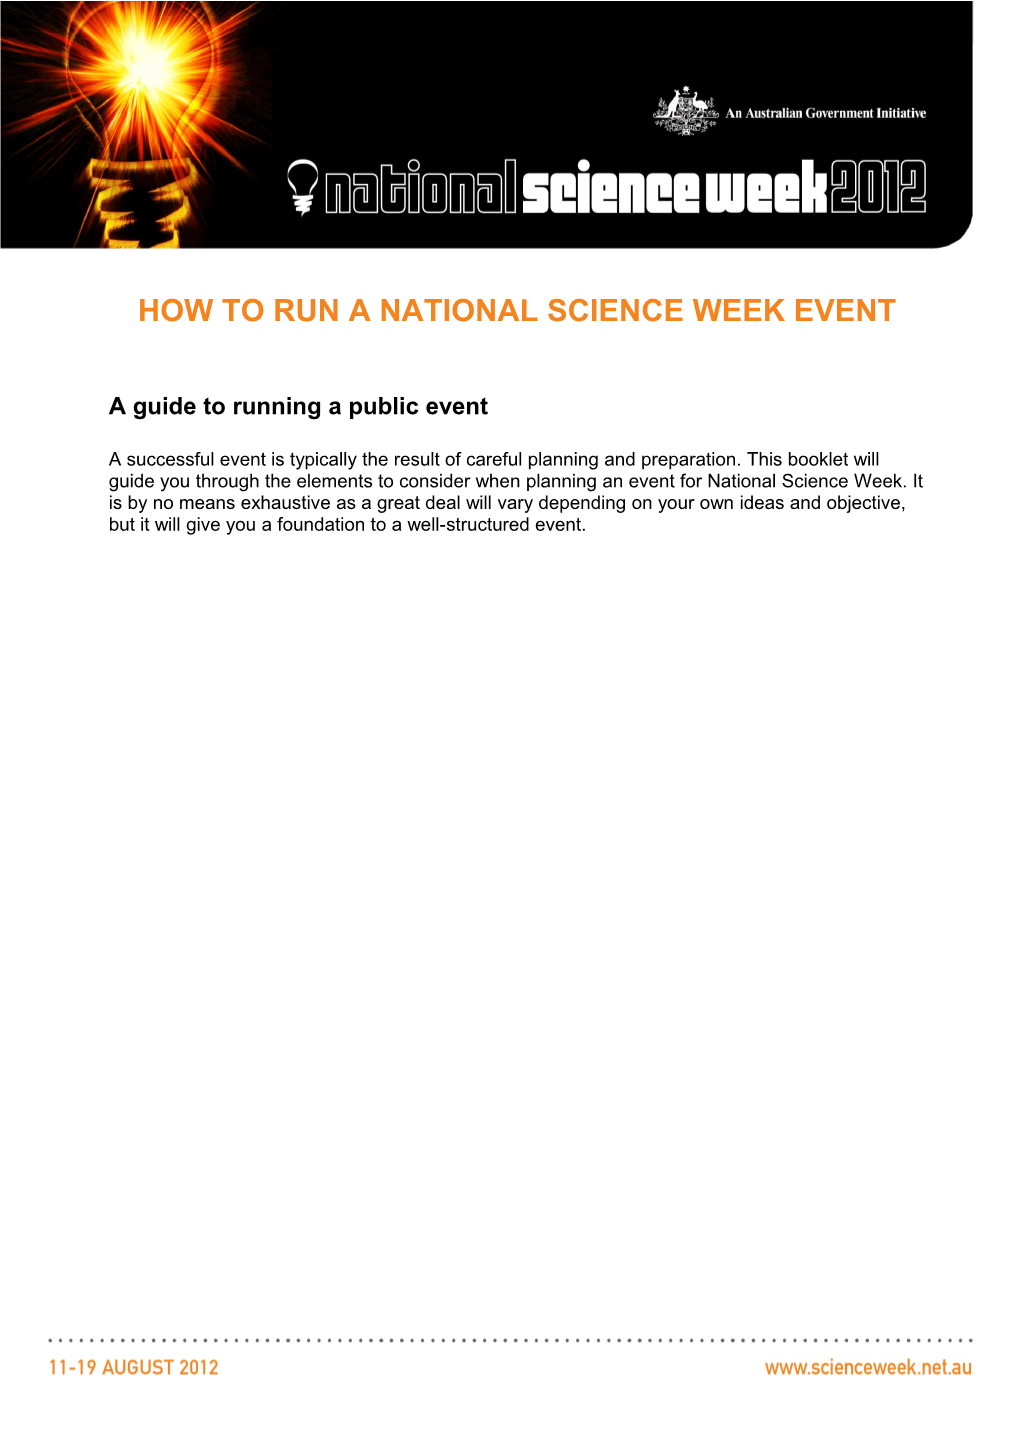 How to Run a National Science Week Event